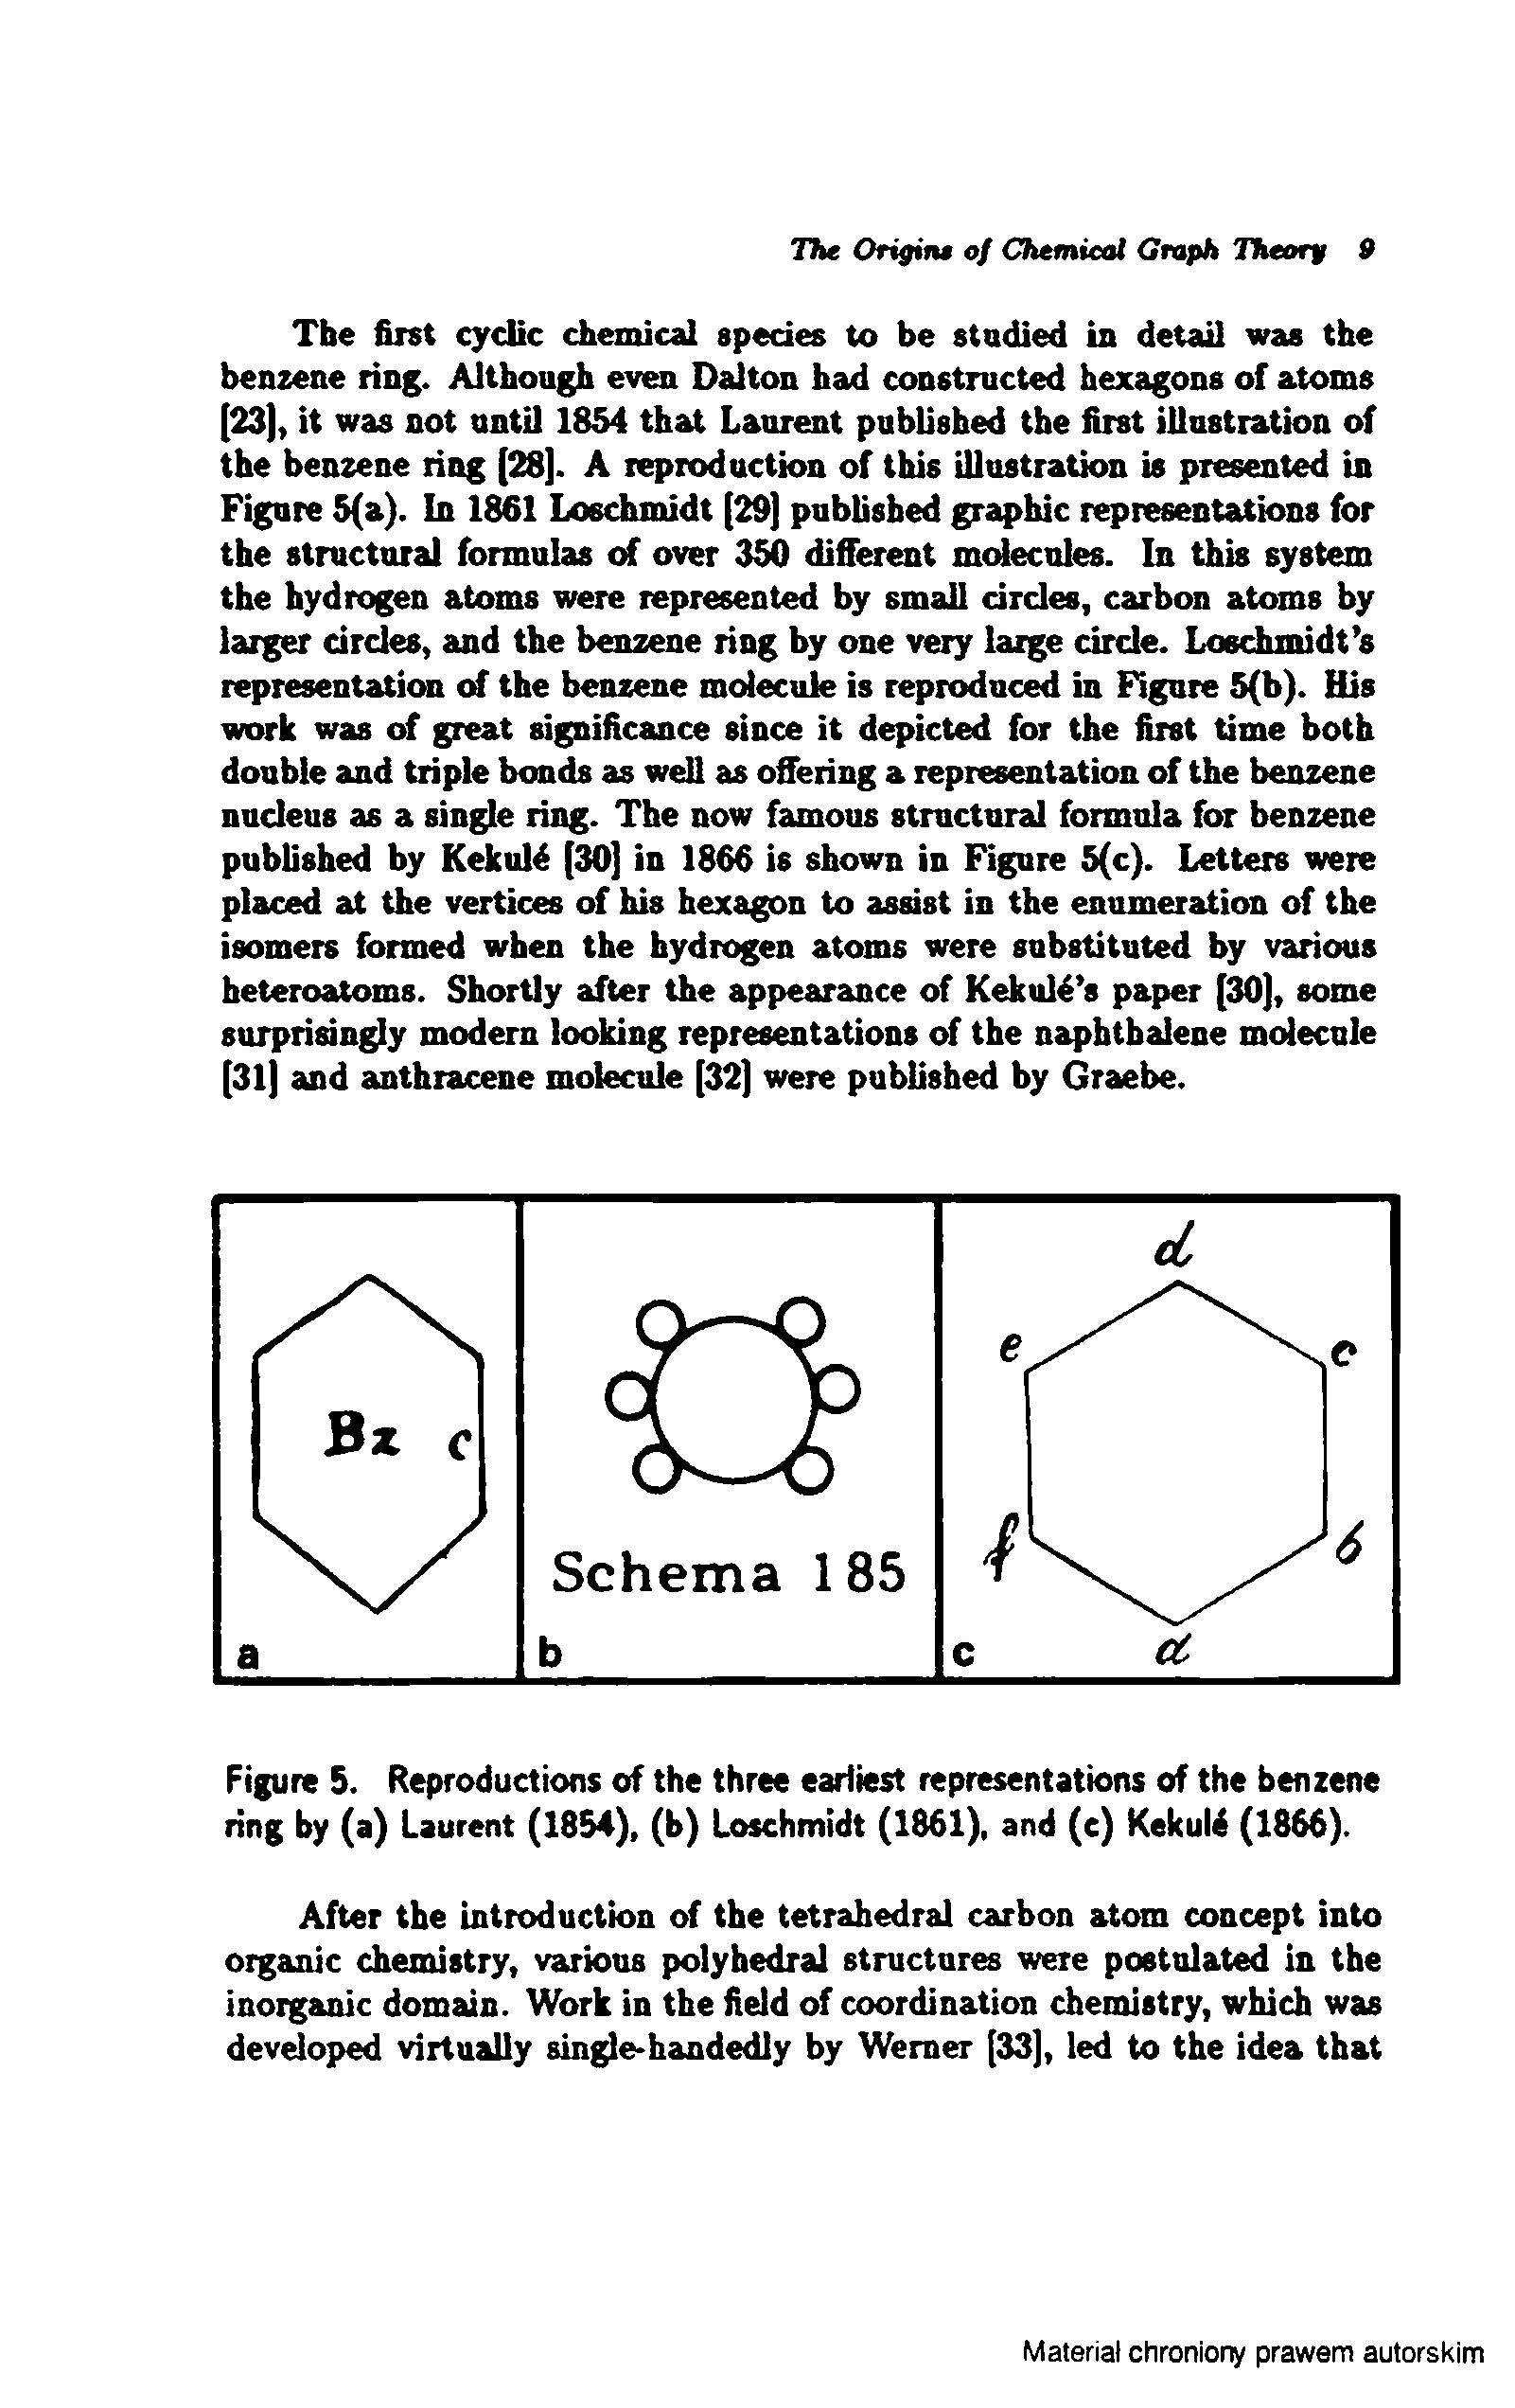 Figure 5. Reproductions of the three earliest representations of the benzene ring by (a) Laurent (1854), (b) Loschmidt (1861), and (c) Kekuld (1866).